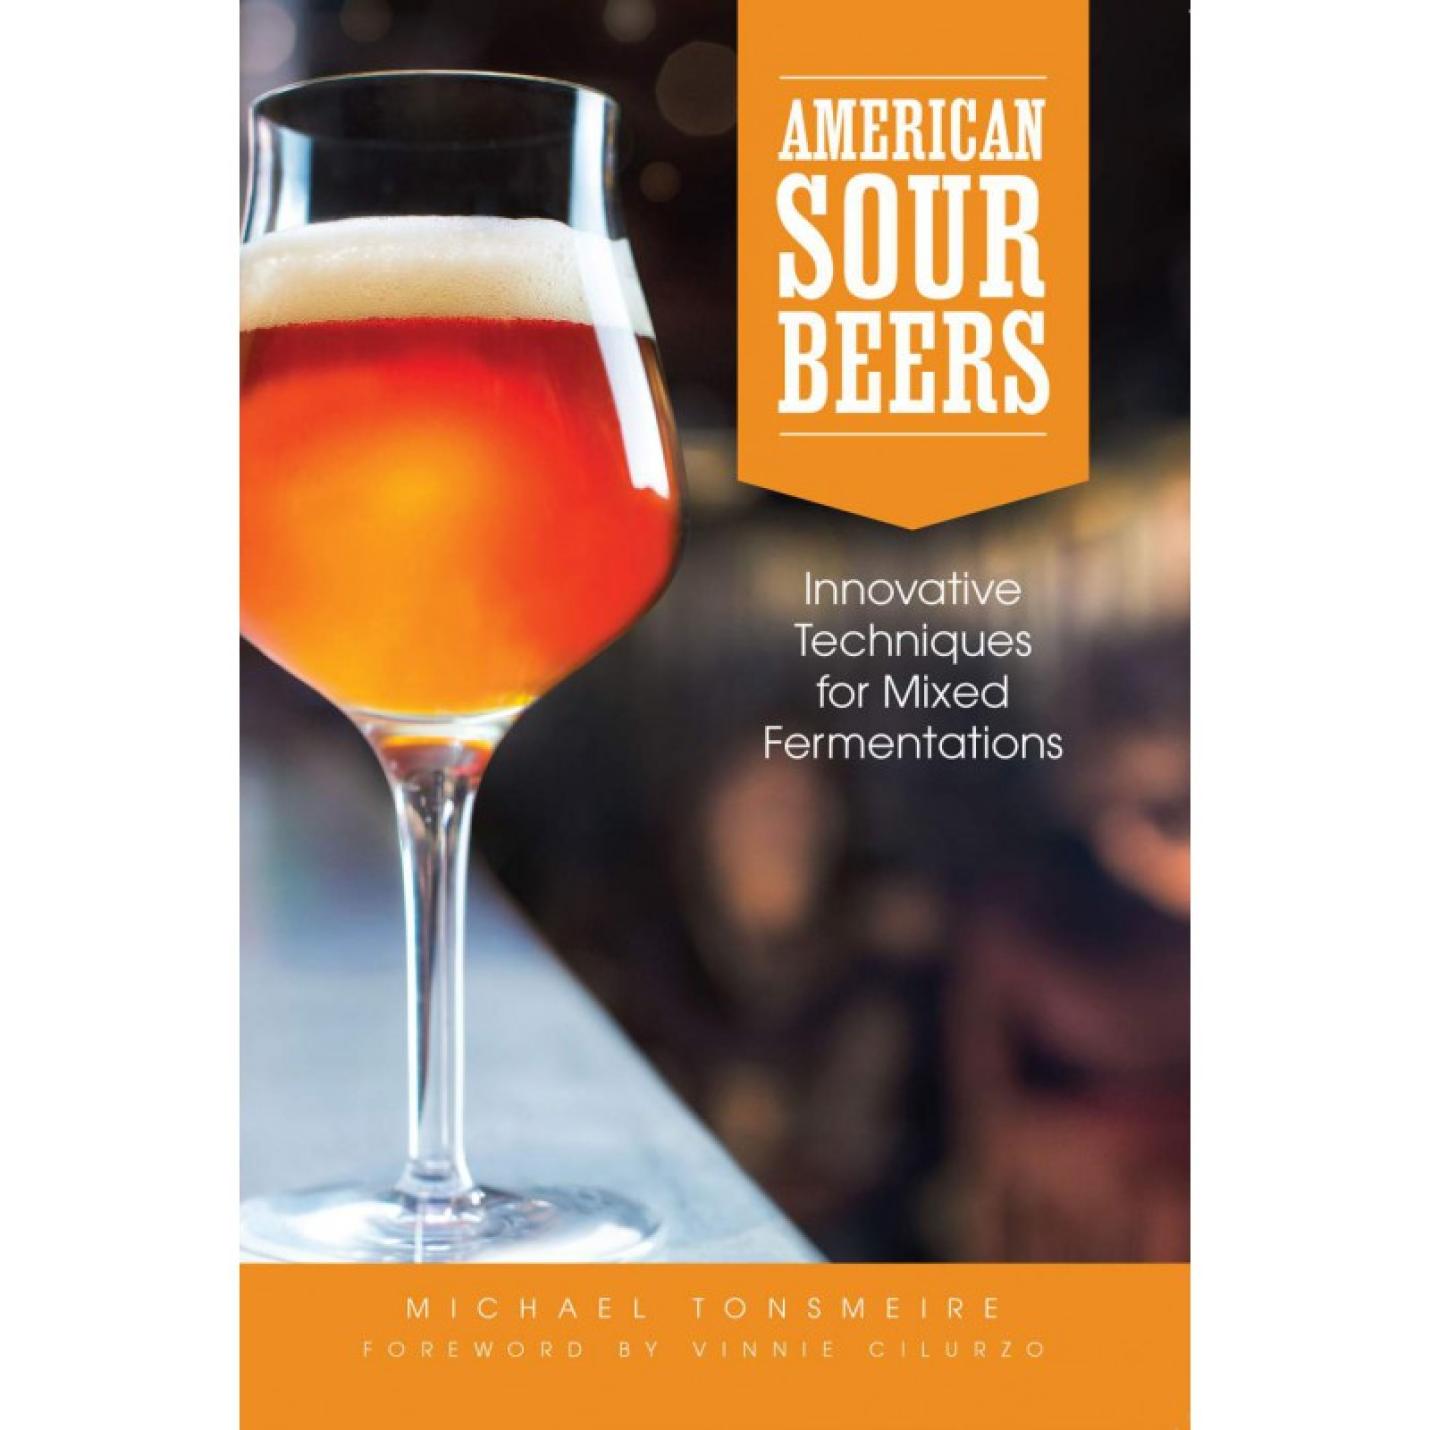 ‘American Sour Beers: Innovative Techniques For Mixed Fermentations’ - Michael Tonsmeire